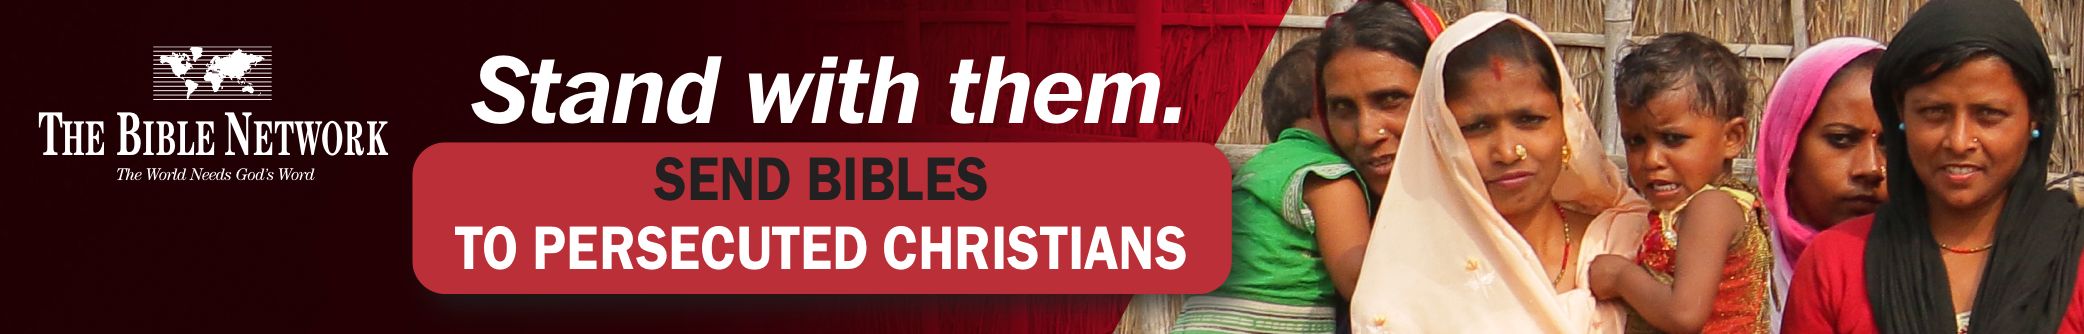 Listbroker Ltd: The Bible Network - Stand with them. Send Bibles to persecuted Christians